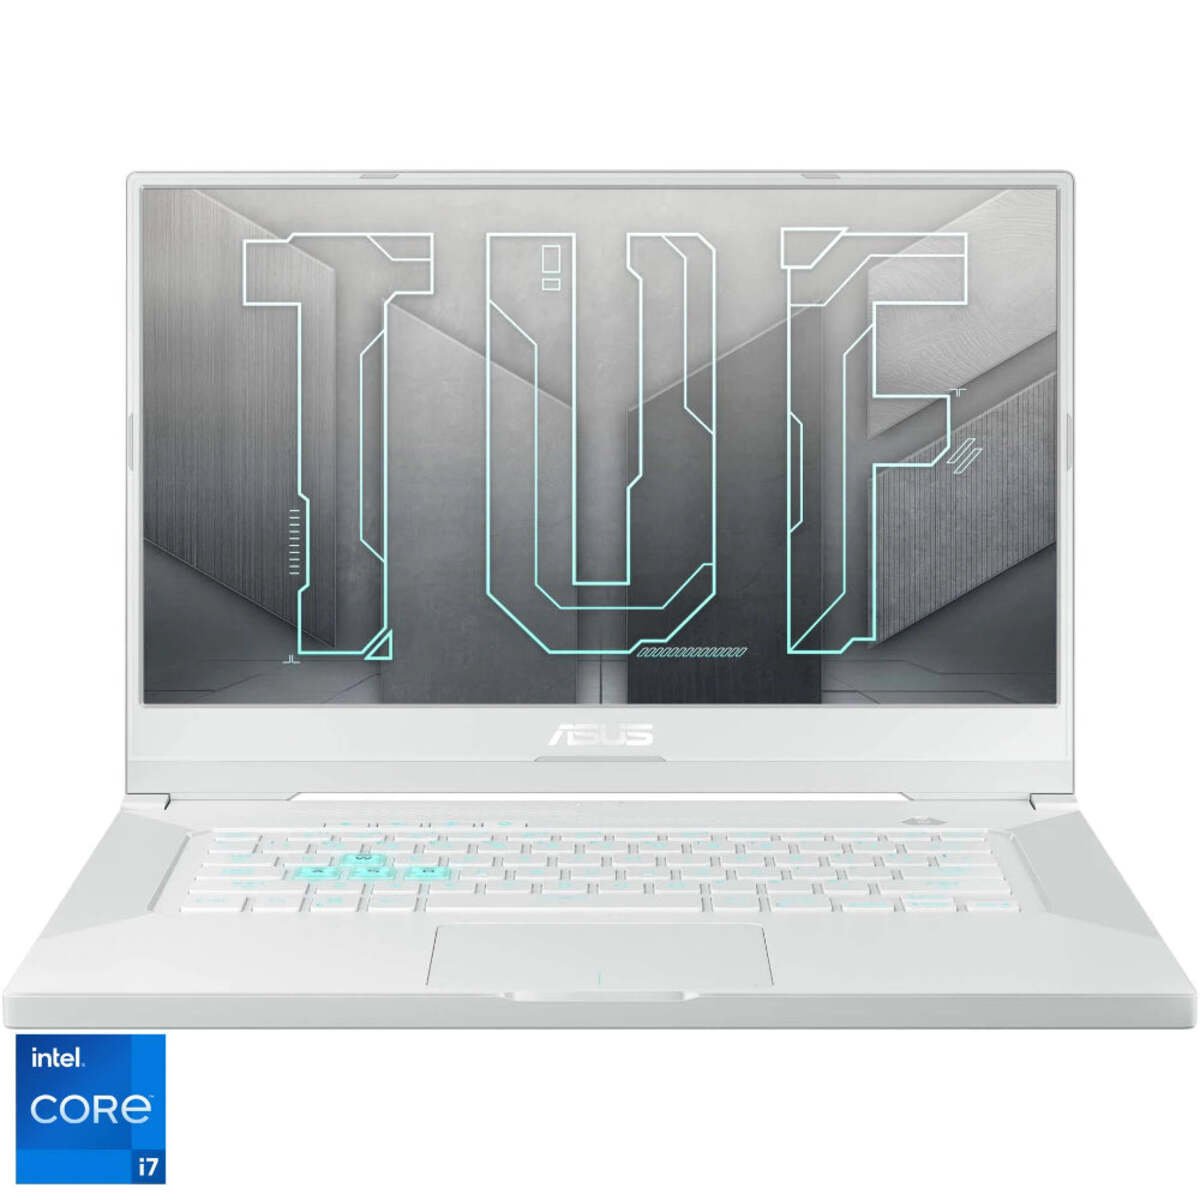 Asus TUF FX516PC-HN005, Core i7-11370H, 16GB RAM 512GB SSD, 4GB NVIDIA GeForce RTX 3050, 15.6 Inches FHD, DOS. Moonlight White